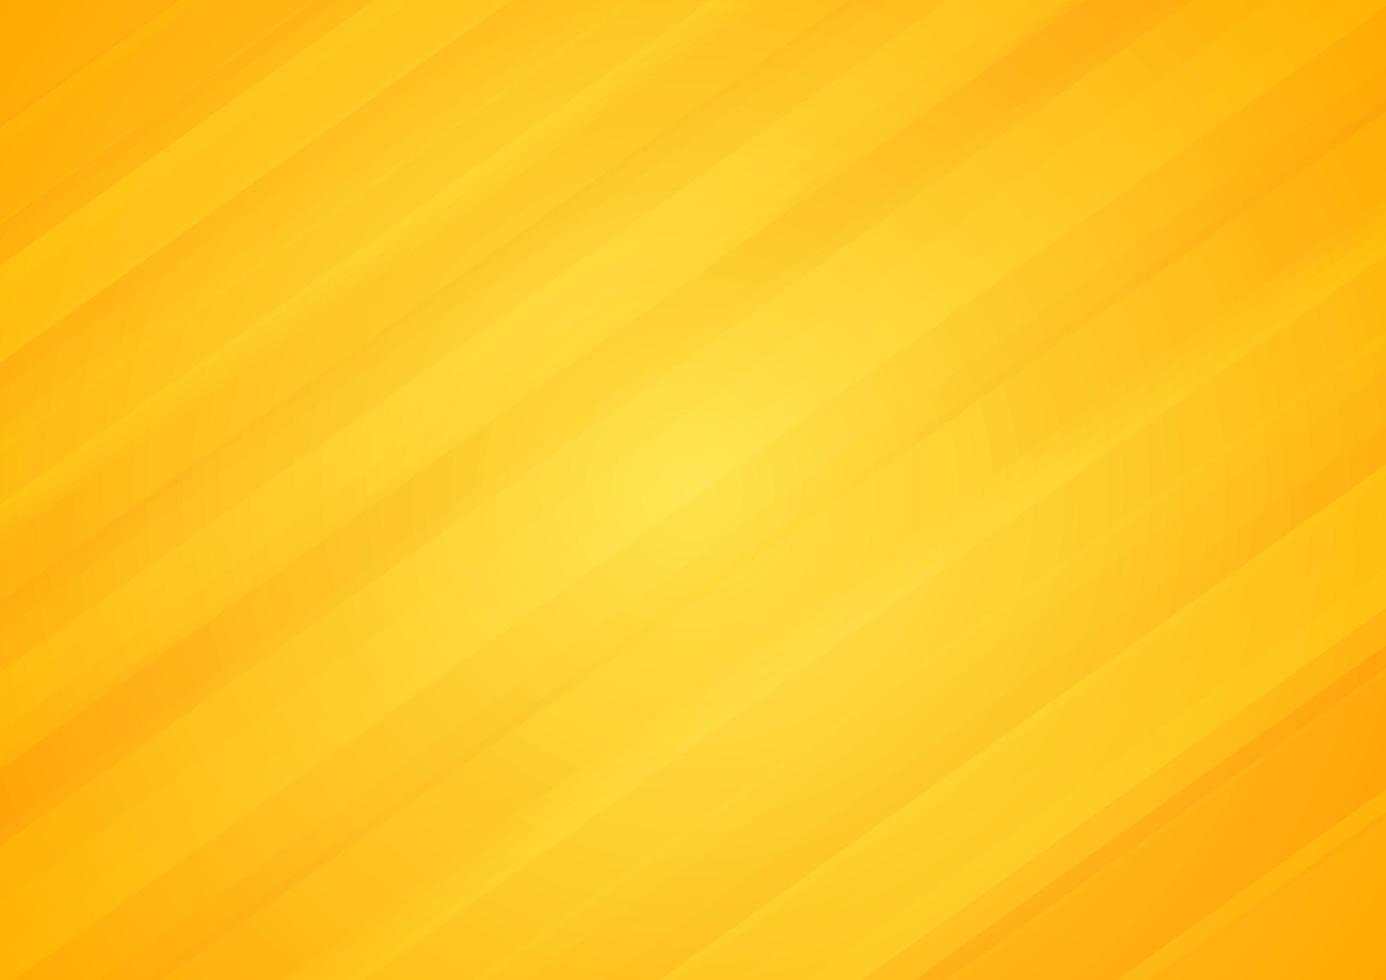 Abstract yellow gradient diagonal background vector